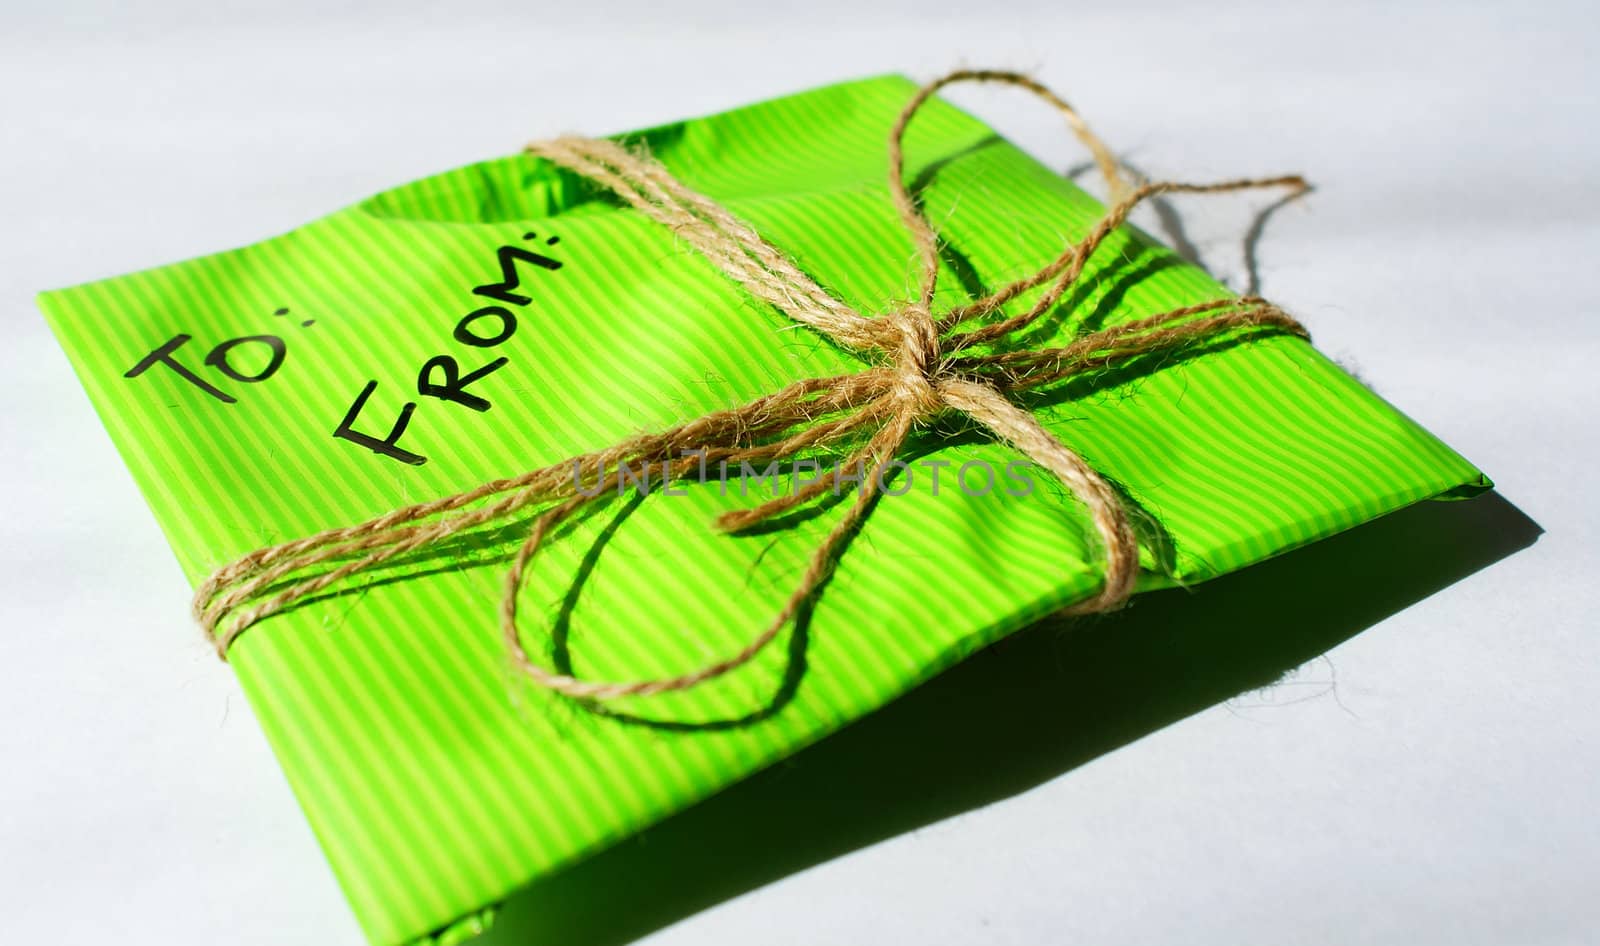 personal letter in a green tied envelope